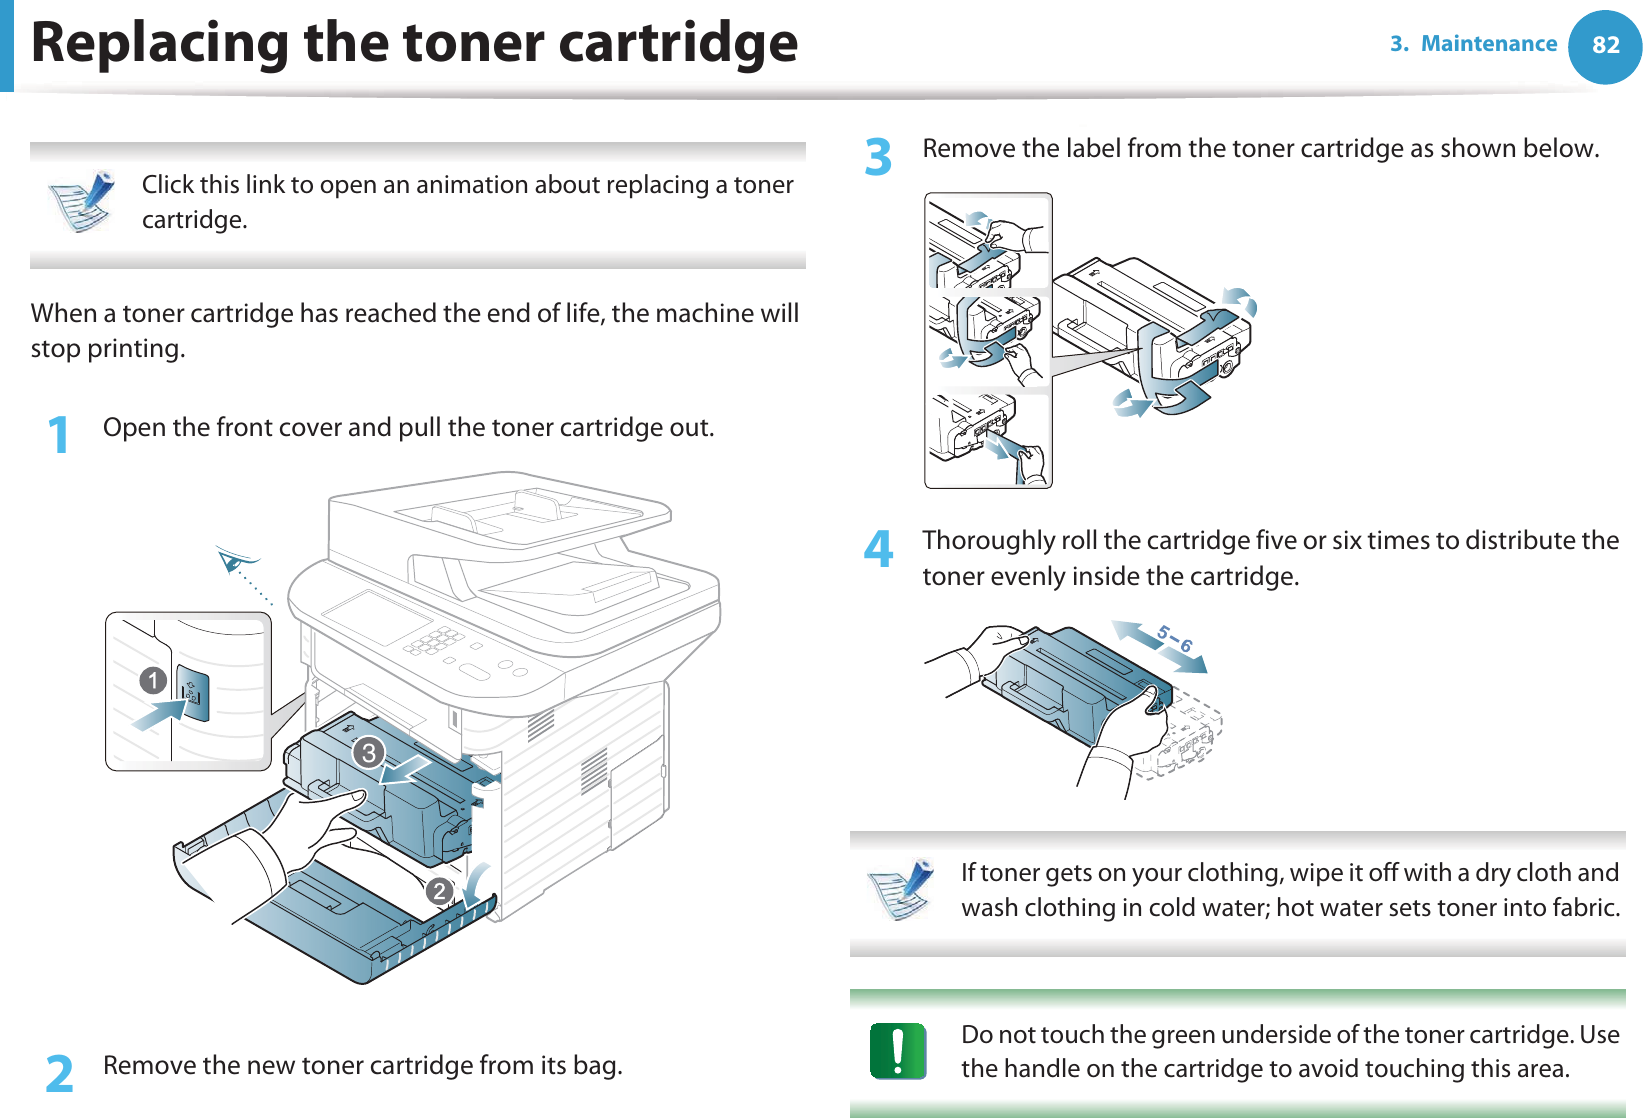 823. MaintenanceReplacing the toner cartridge Click this link to open an animation about replacing a toner cartridge. When a toner cartridge has reached the end of life, the machine will stop printing.1Open the front cover and pull the toner cartridge out.2  Remove the new toner cartridge from its bag. 3  Remove the label from the toner cartridge as shown below.4  Thoroughly roll the cartridge five or six times to distribute the toner evenly inside the cartridge. If toner gets on your clothing, wipe it off with a dry cloth and wash clothing in cold water; hot water sets toner into fabric.  Do not touch the green underside of the toner cartridge. Use the handle on the cartridge to avoid touching this area.  3